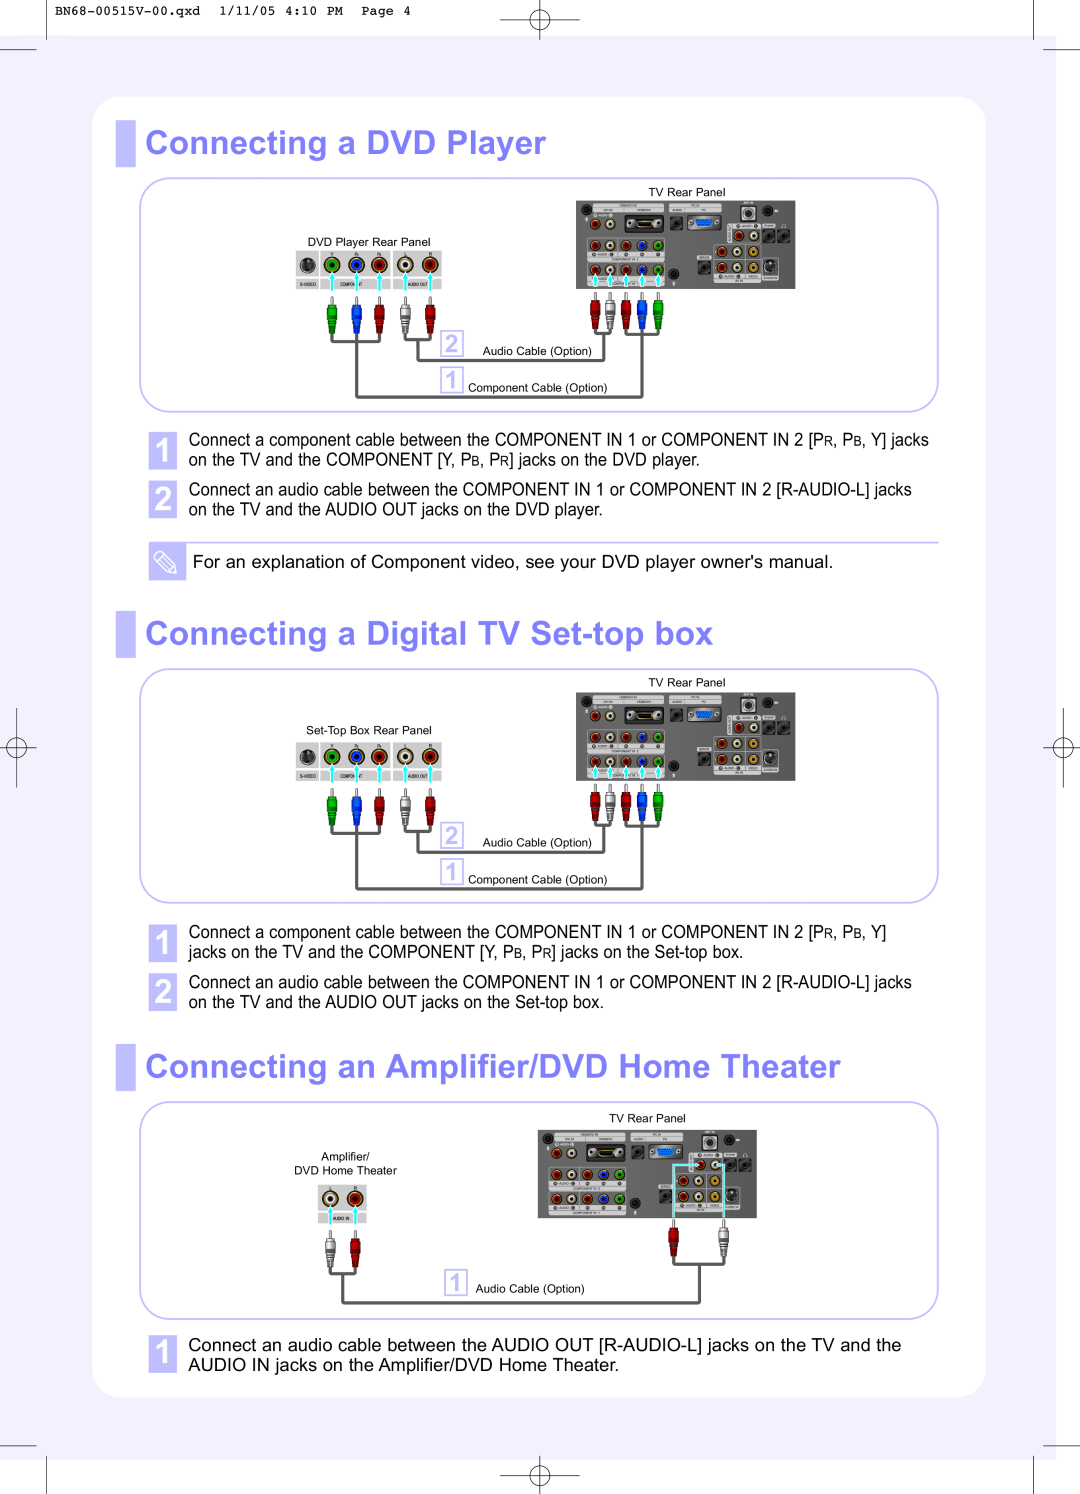 Samsung LN-R268W Connecting a DVD Player, Connecting a Digital TV Set-top box, Connecting an Amplifier/DVD Home Theater 